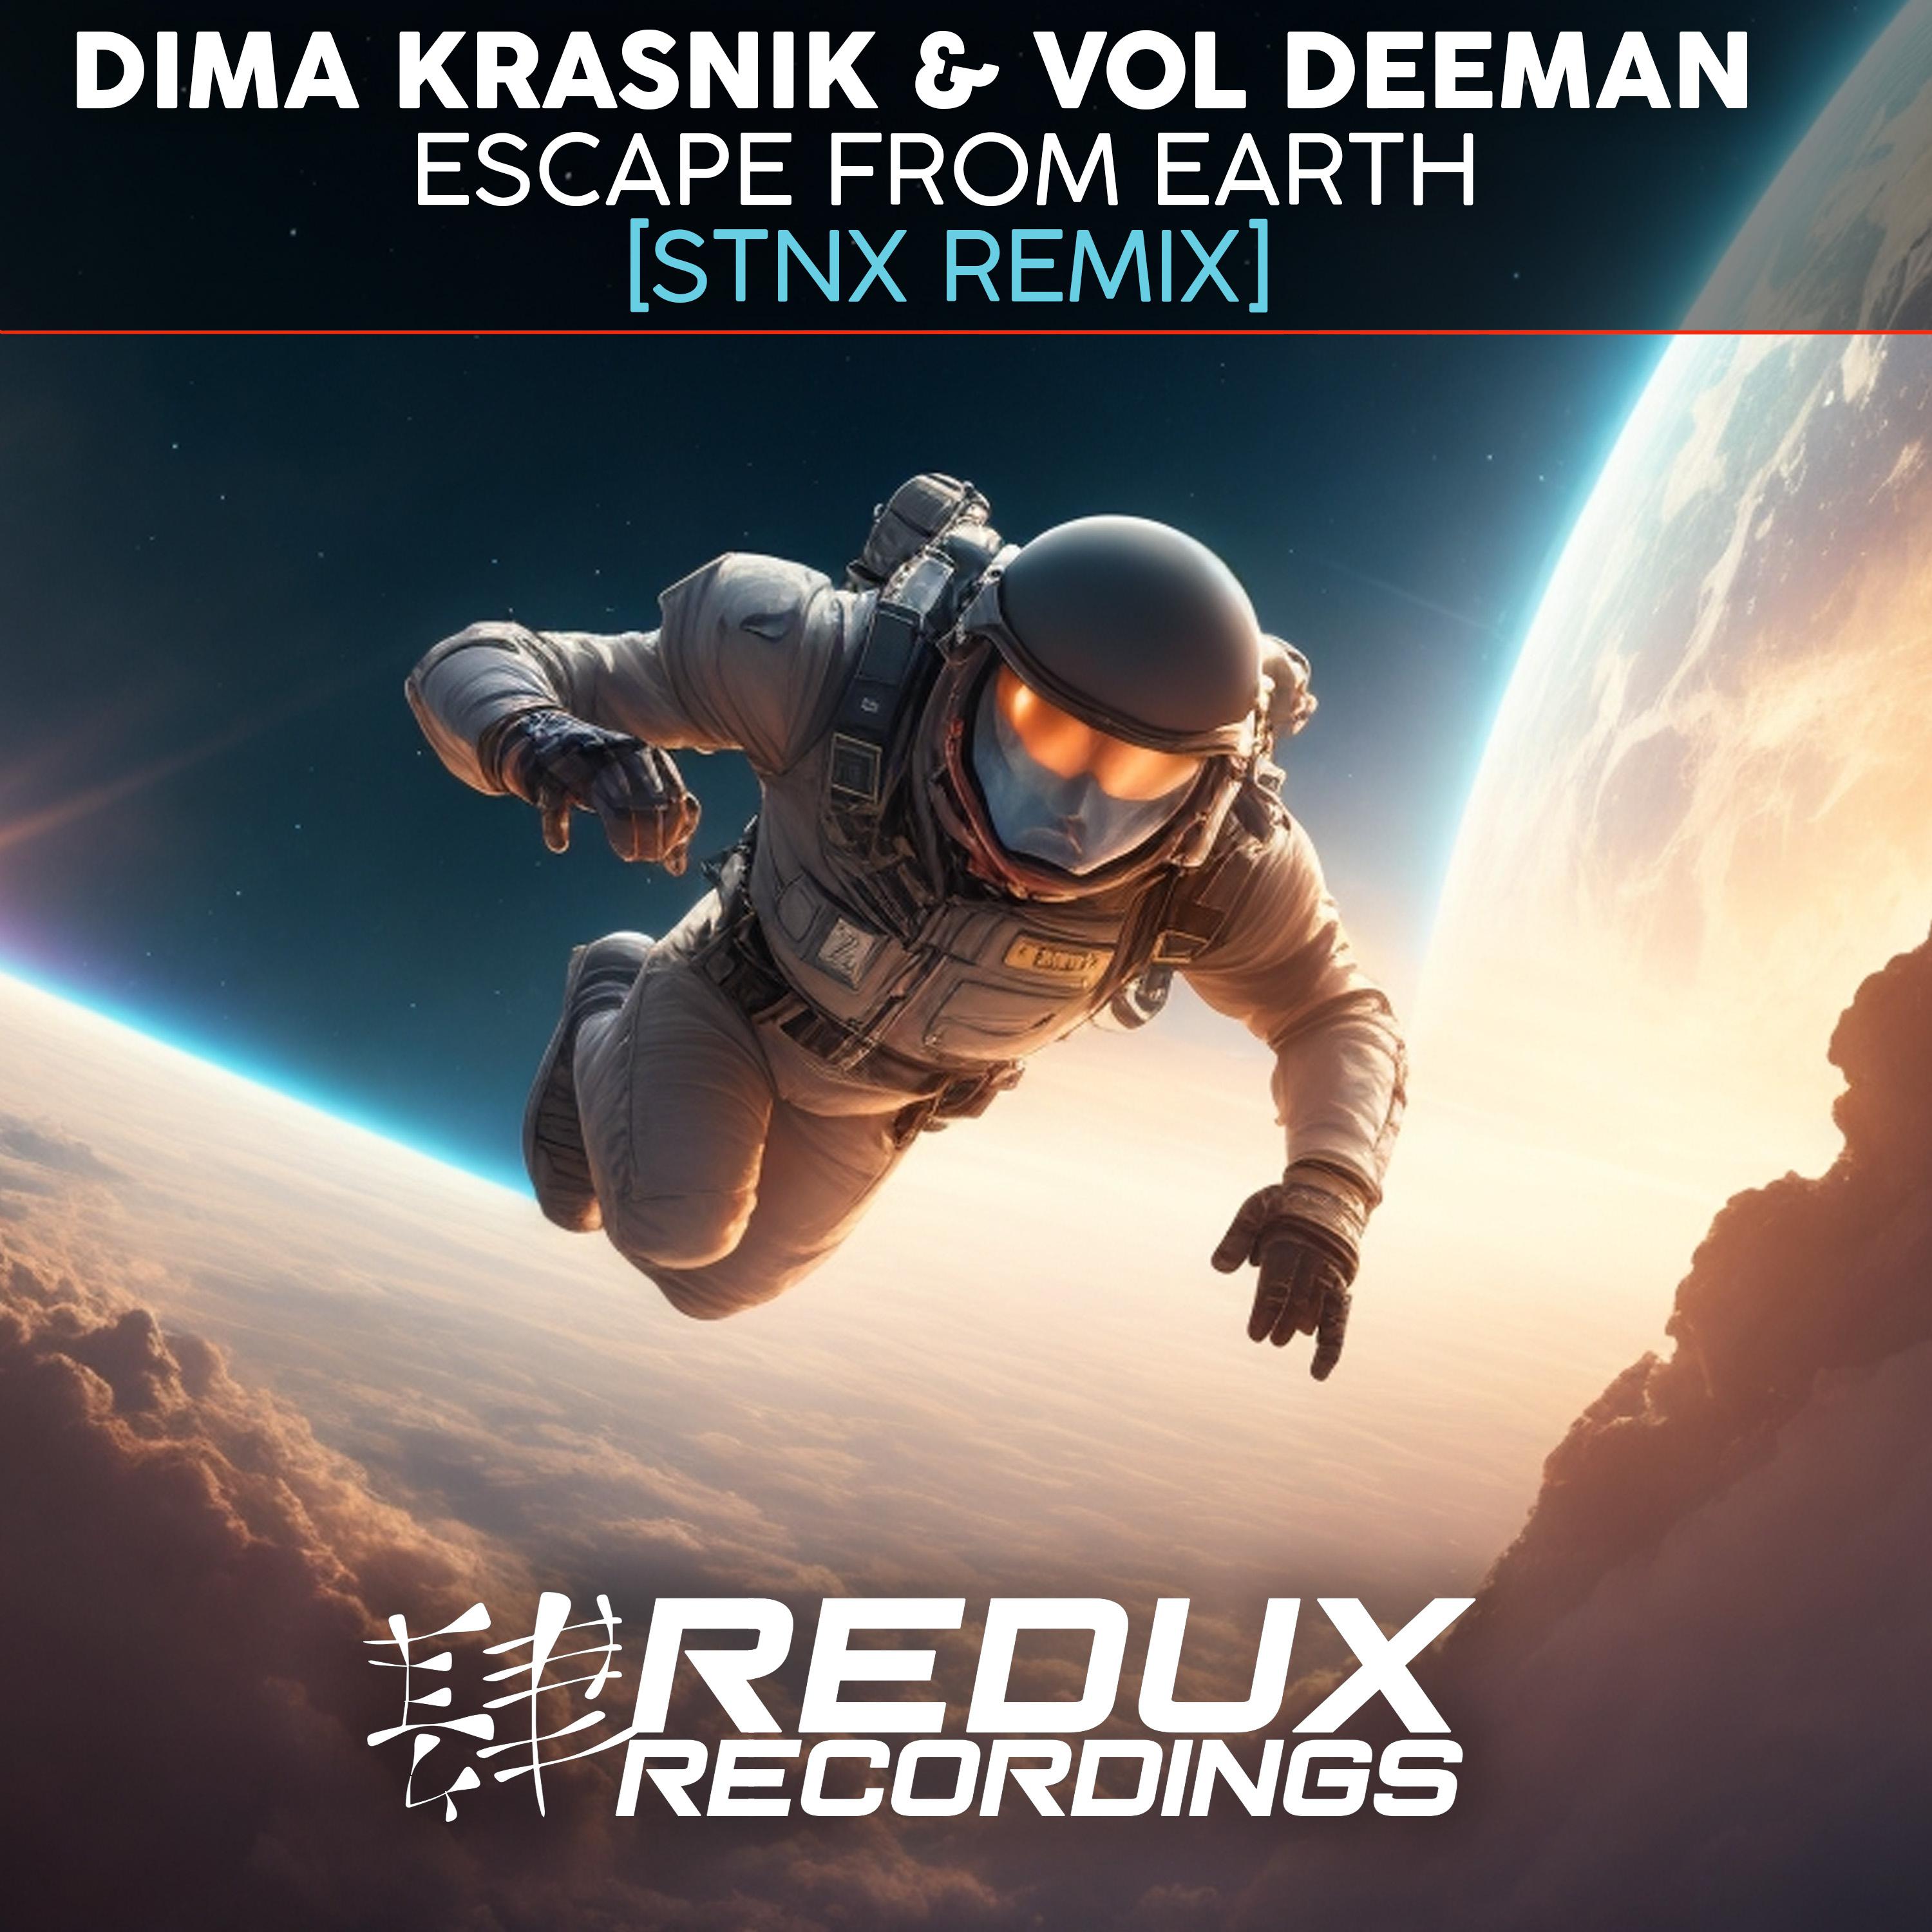 Dima Krasnik - Escape from the Earth (STNX Extended Remix)